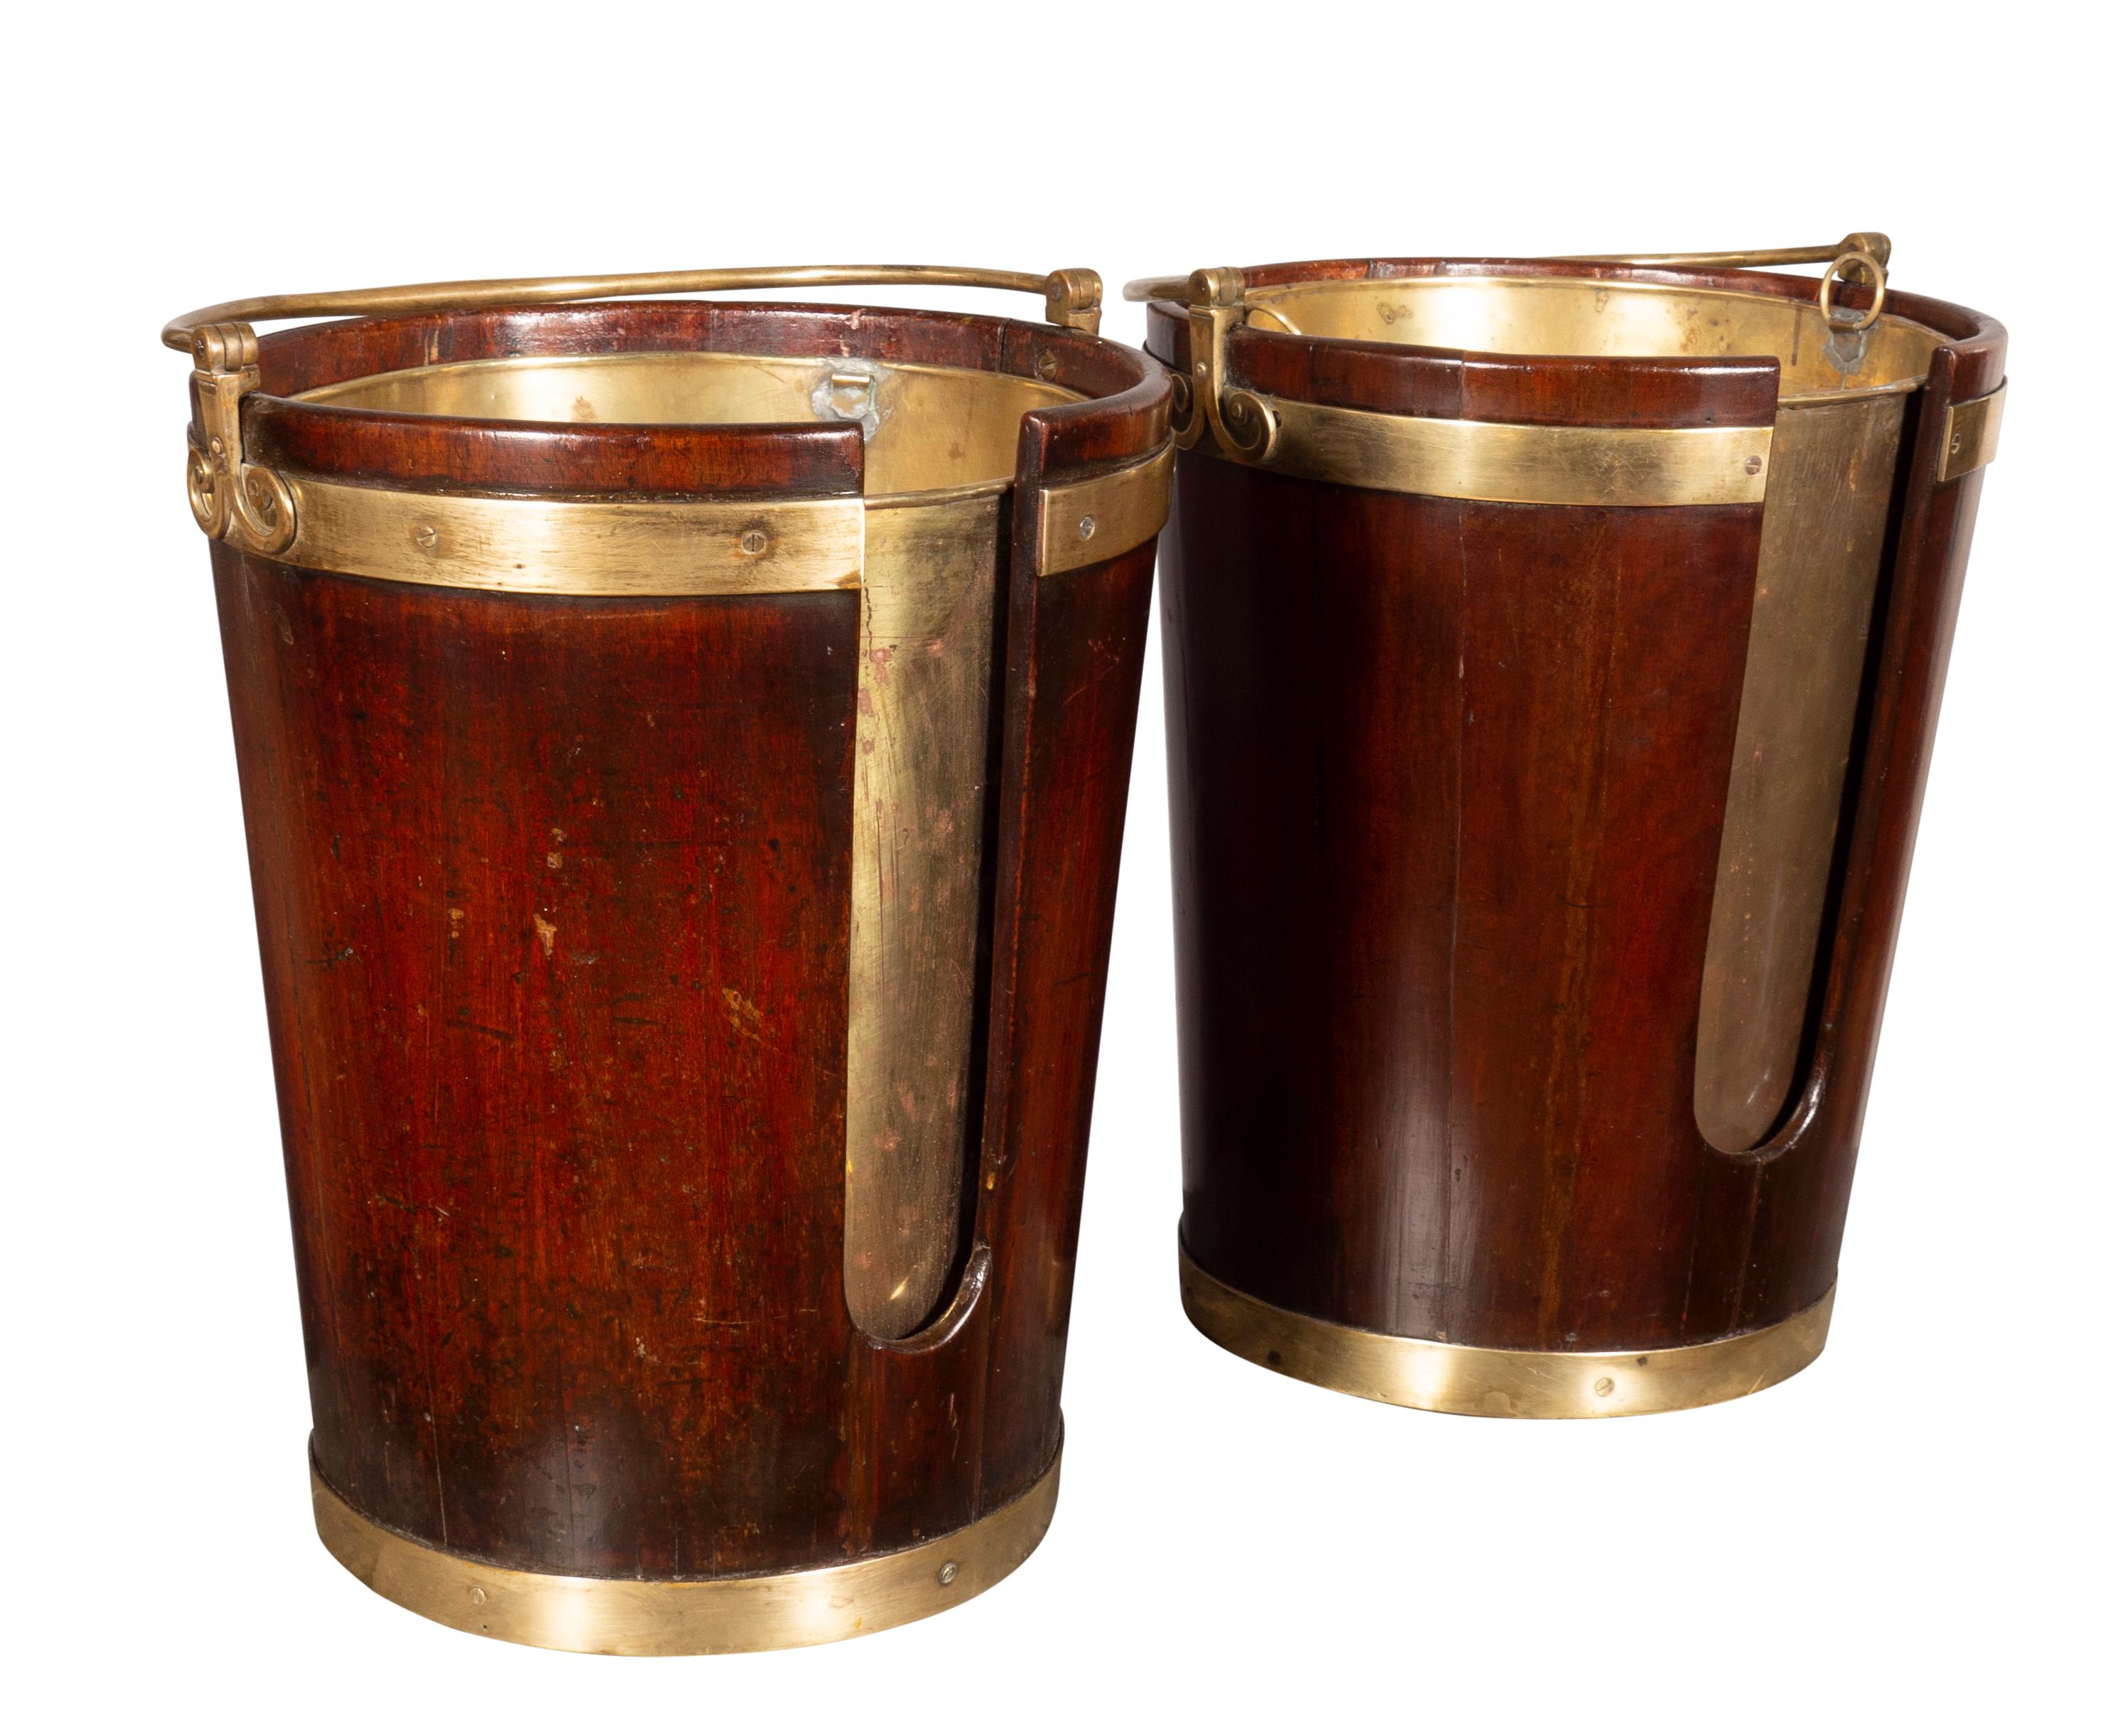 Now with brass liners. Typical form with brass bail handle tapered cylindrical form with brass banding.